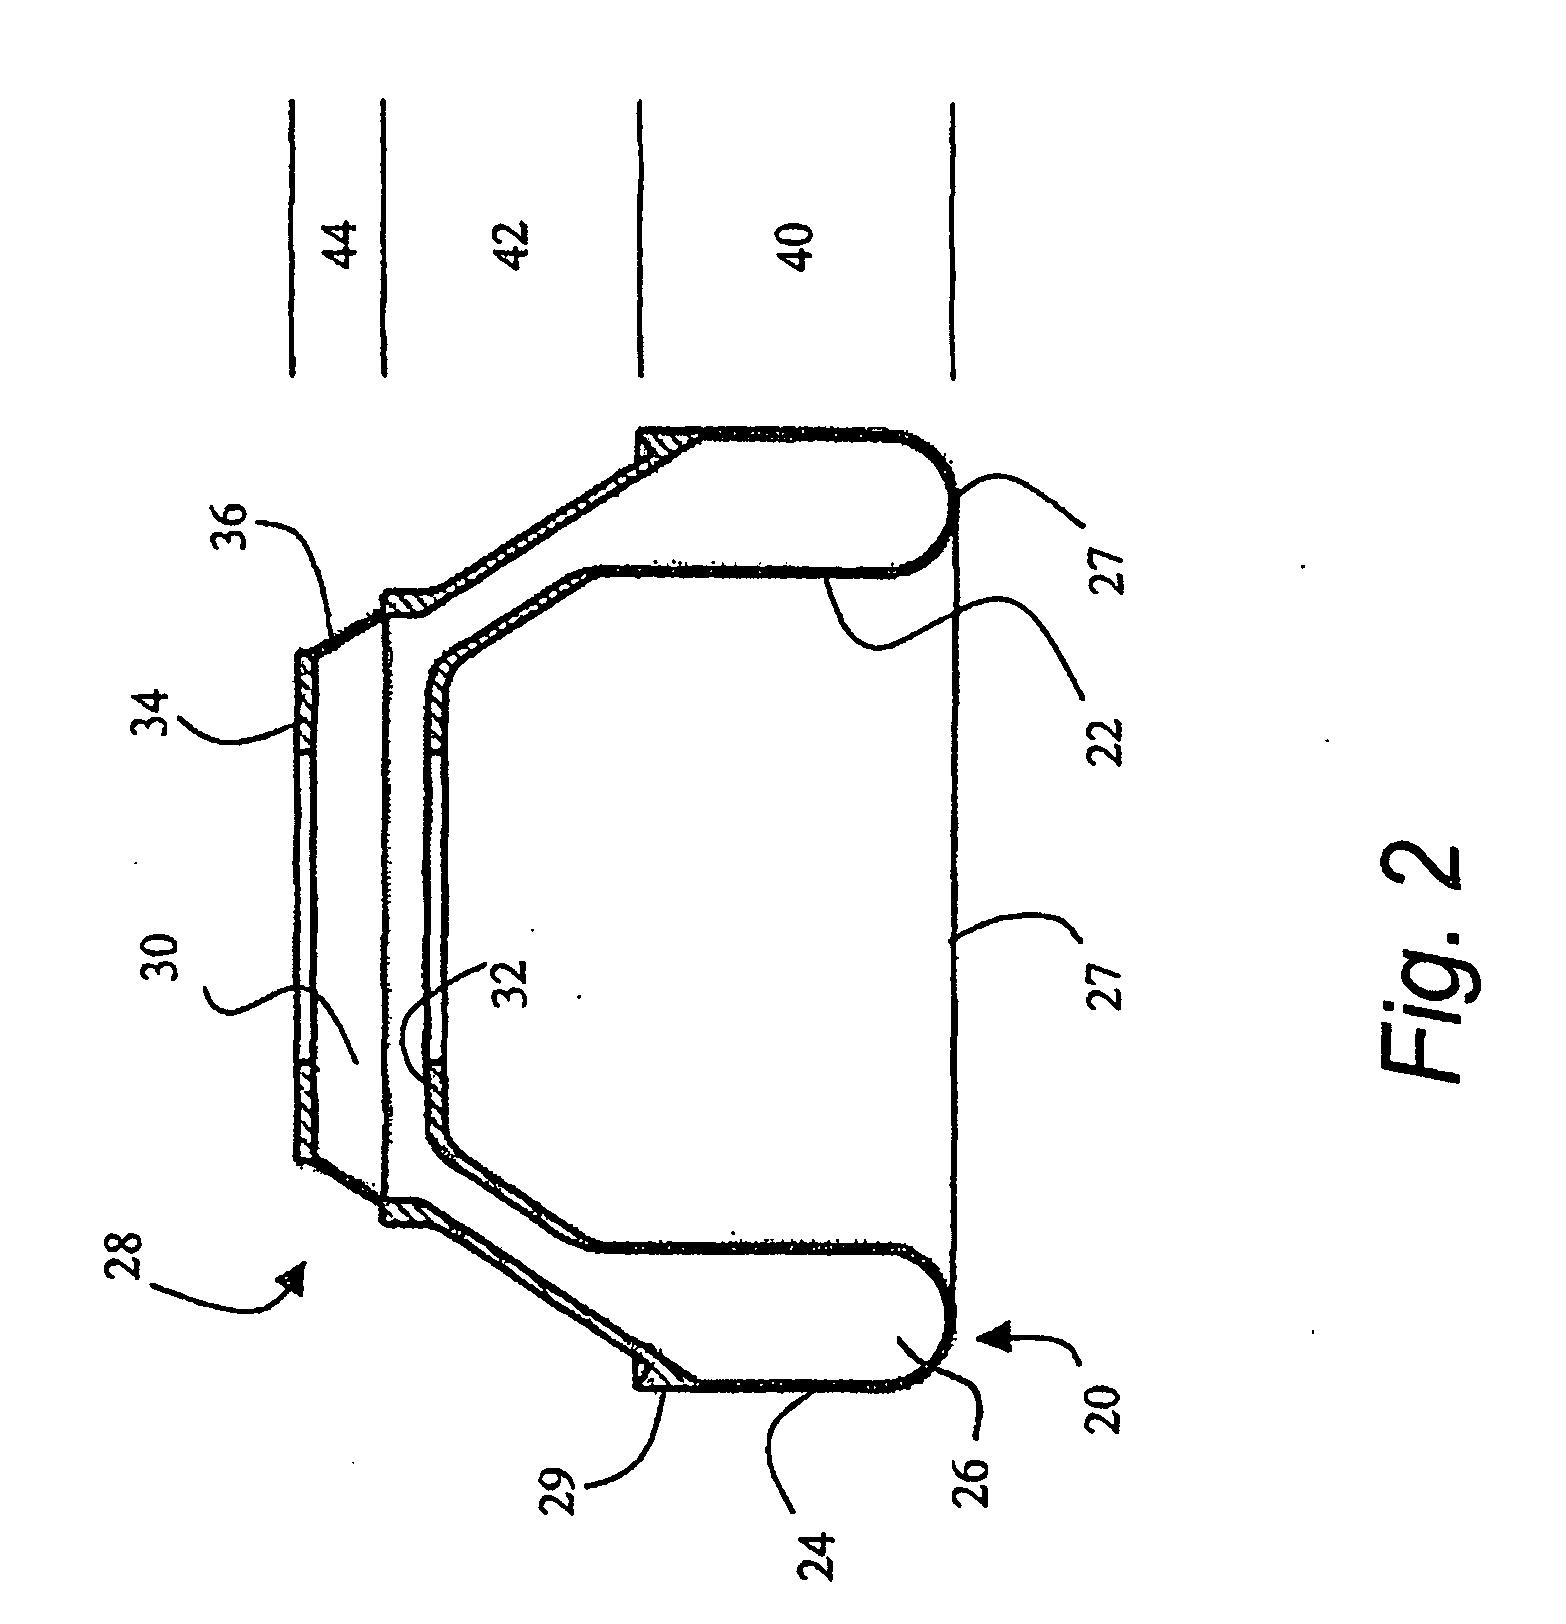 Hollow structure and method/tool for manufacturing same